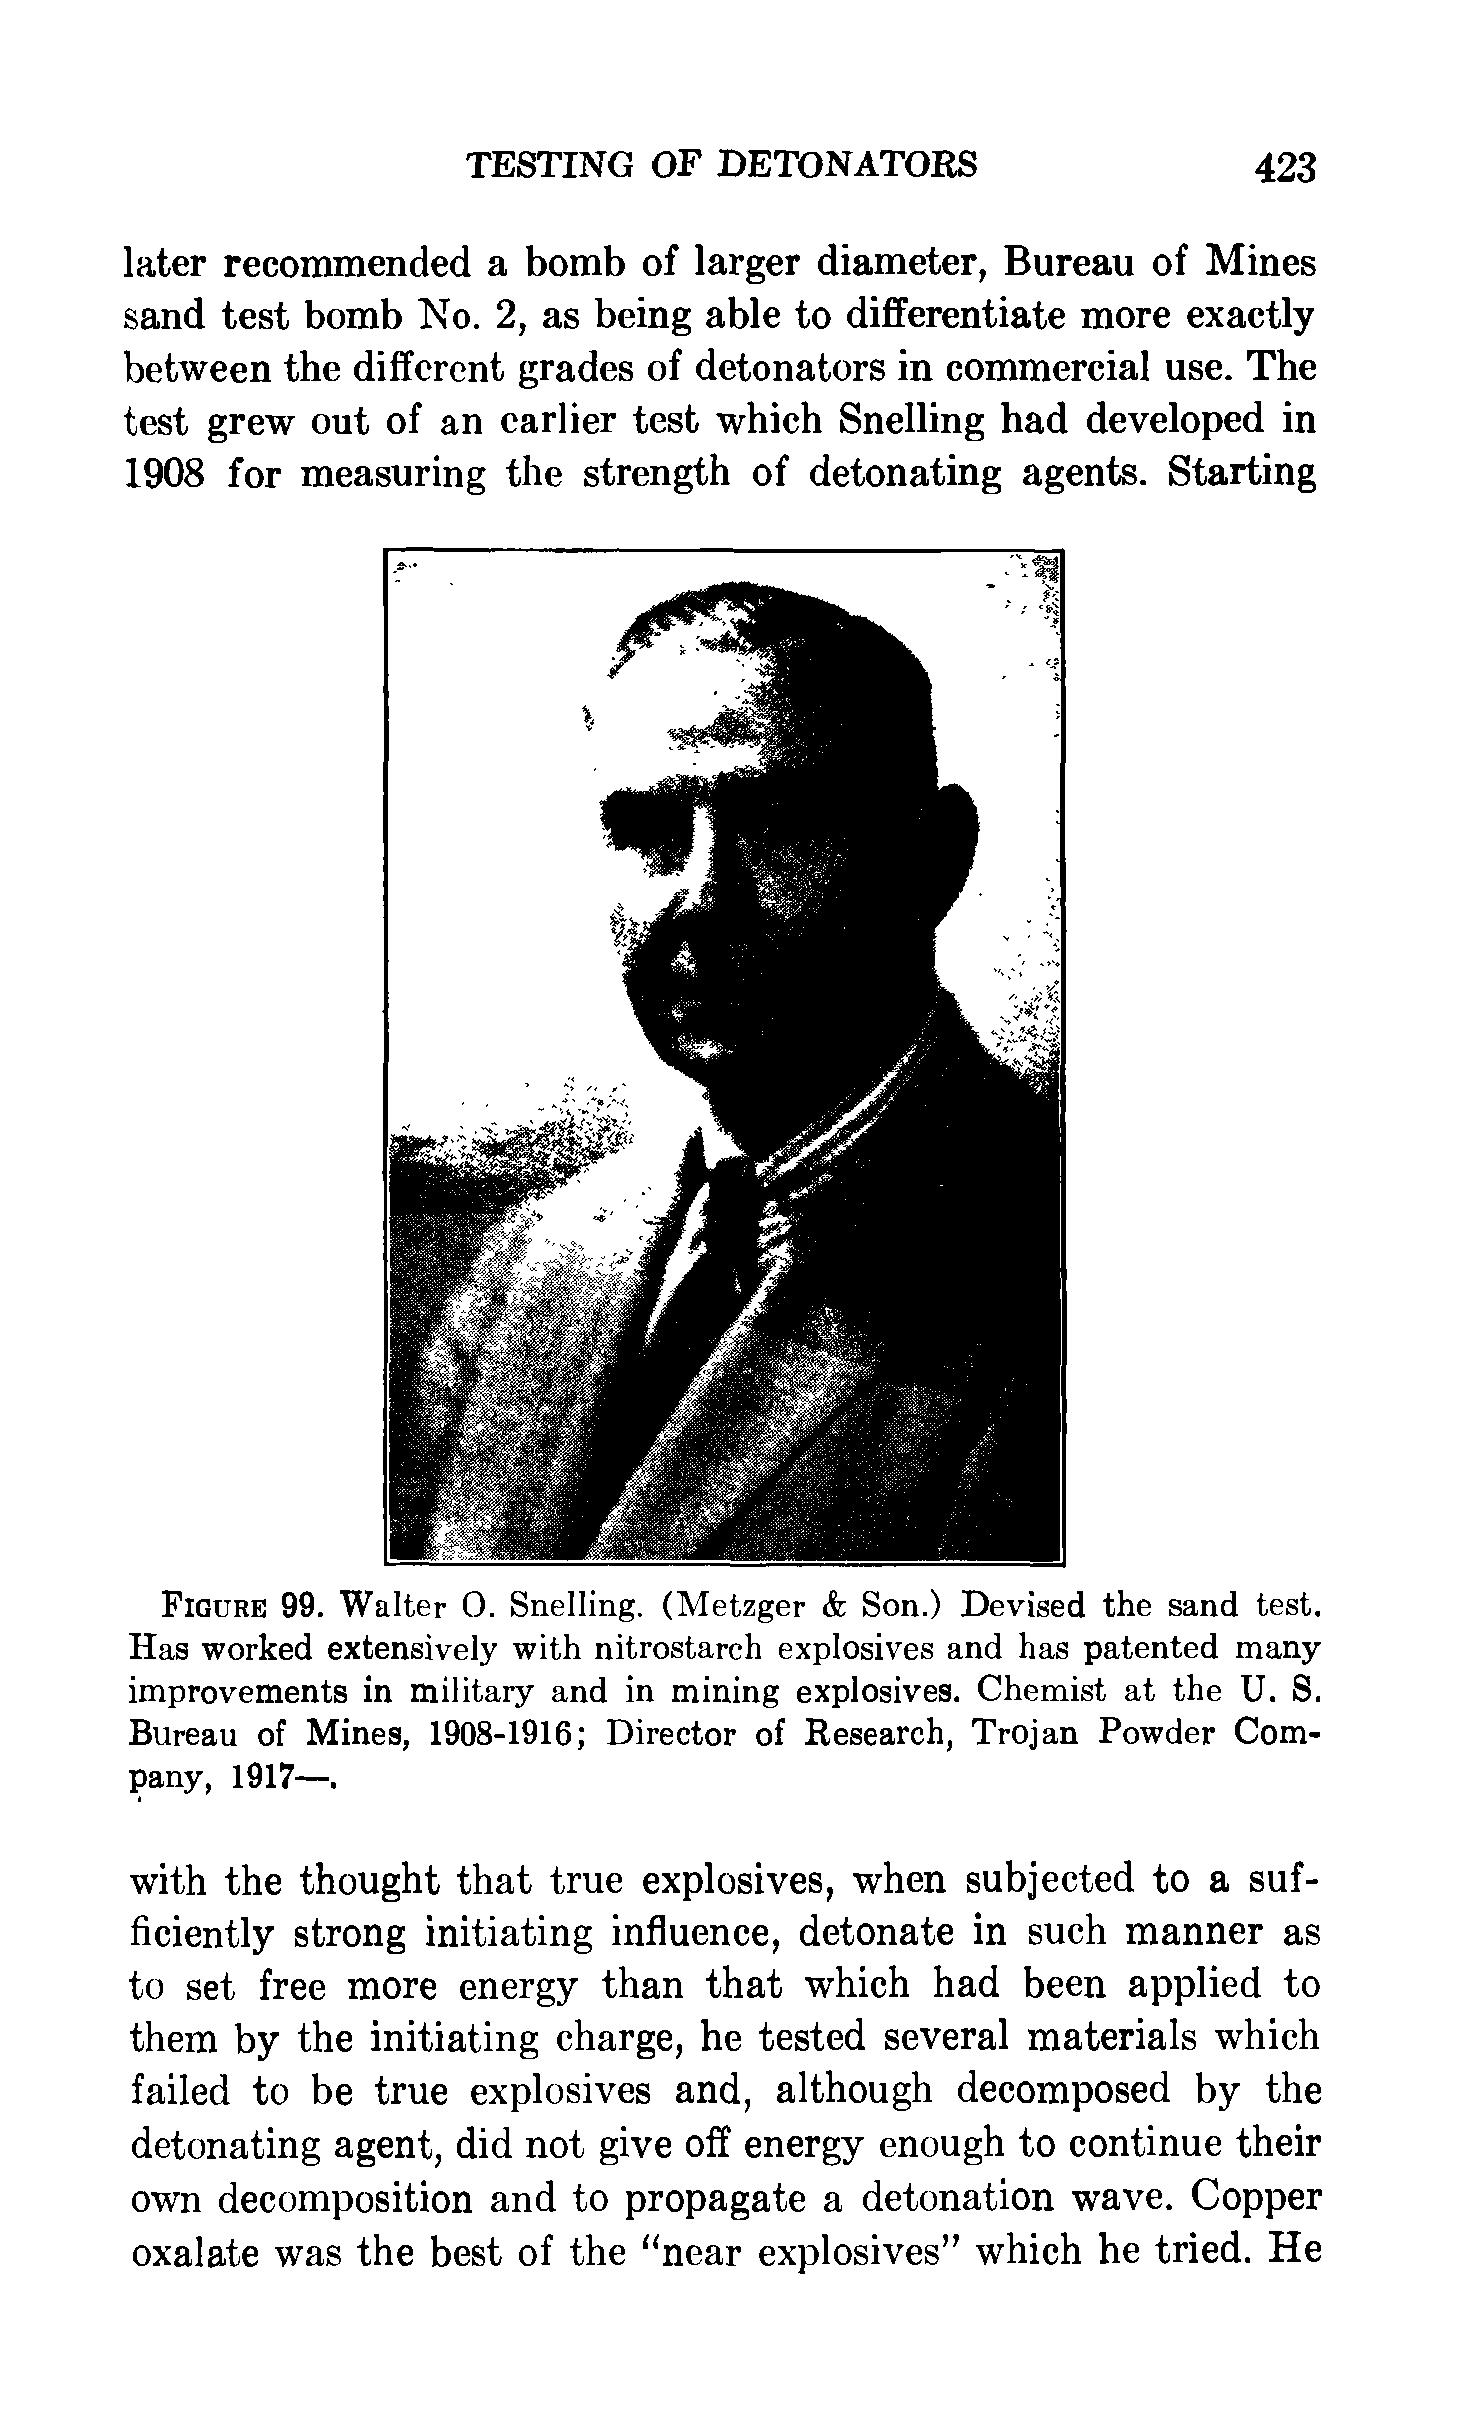 Figure 99. Walter 0. Snelling. (Metzger Son.) Devised the sand test. Has worked extensively with nitrostarch explosives and has patented many improvements in military and in mining explosives. Chemist at the U. S. Bureau of Mines, 1908-1916 Director of Research, Trojan Powder Company, 1917—.